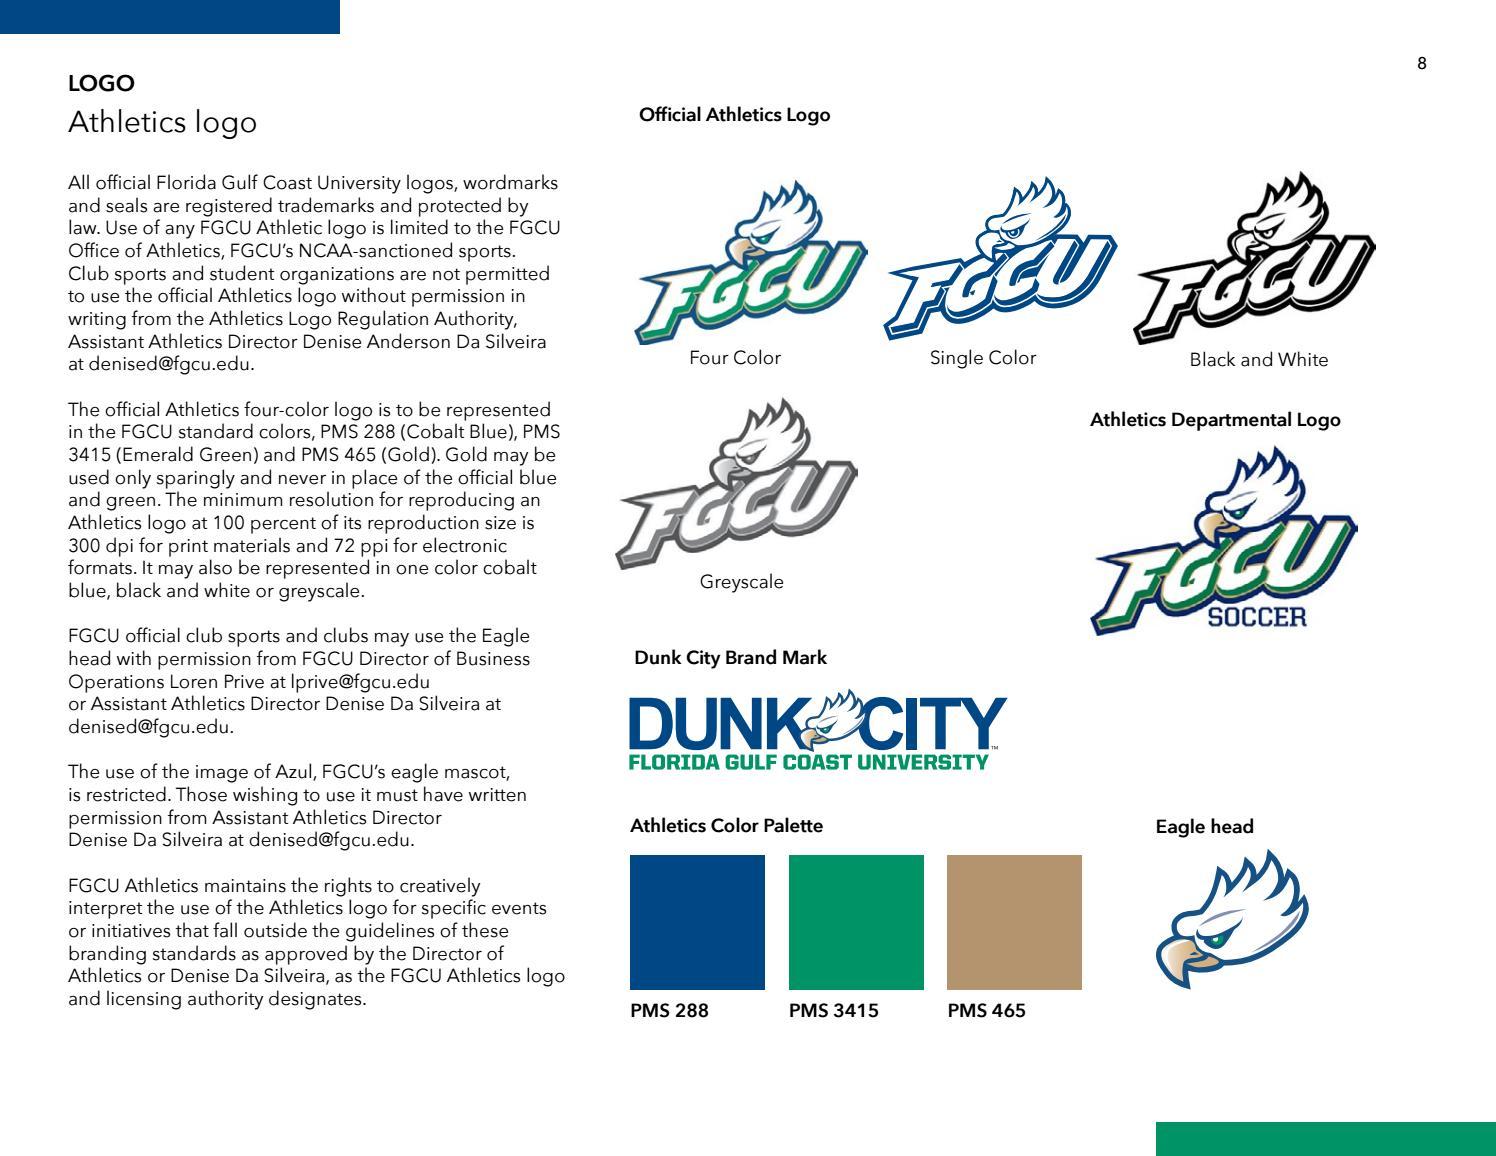 Black and White Sports Authority Logo - FGCU Visual Identity and Brand Guidelines 2017 by Florida Gulf Coast ...